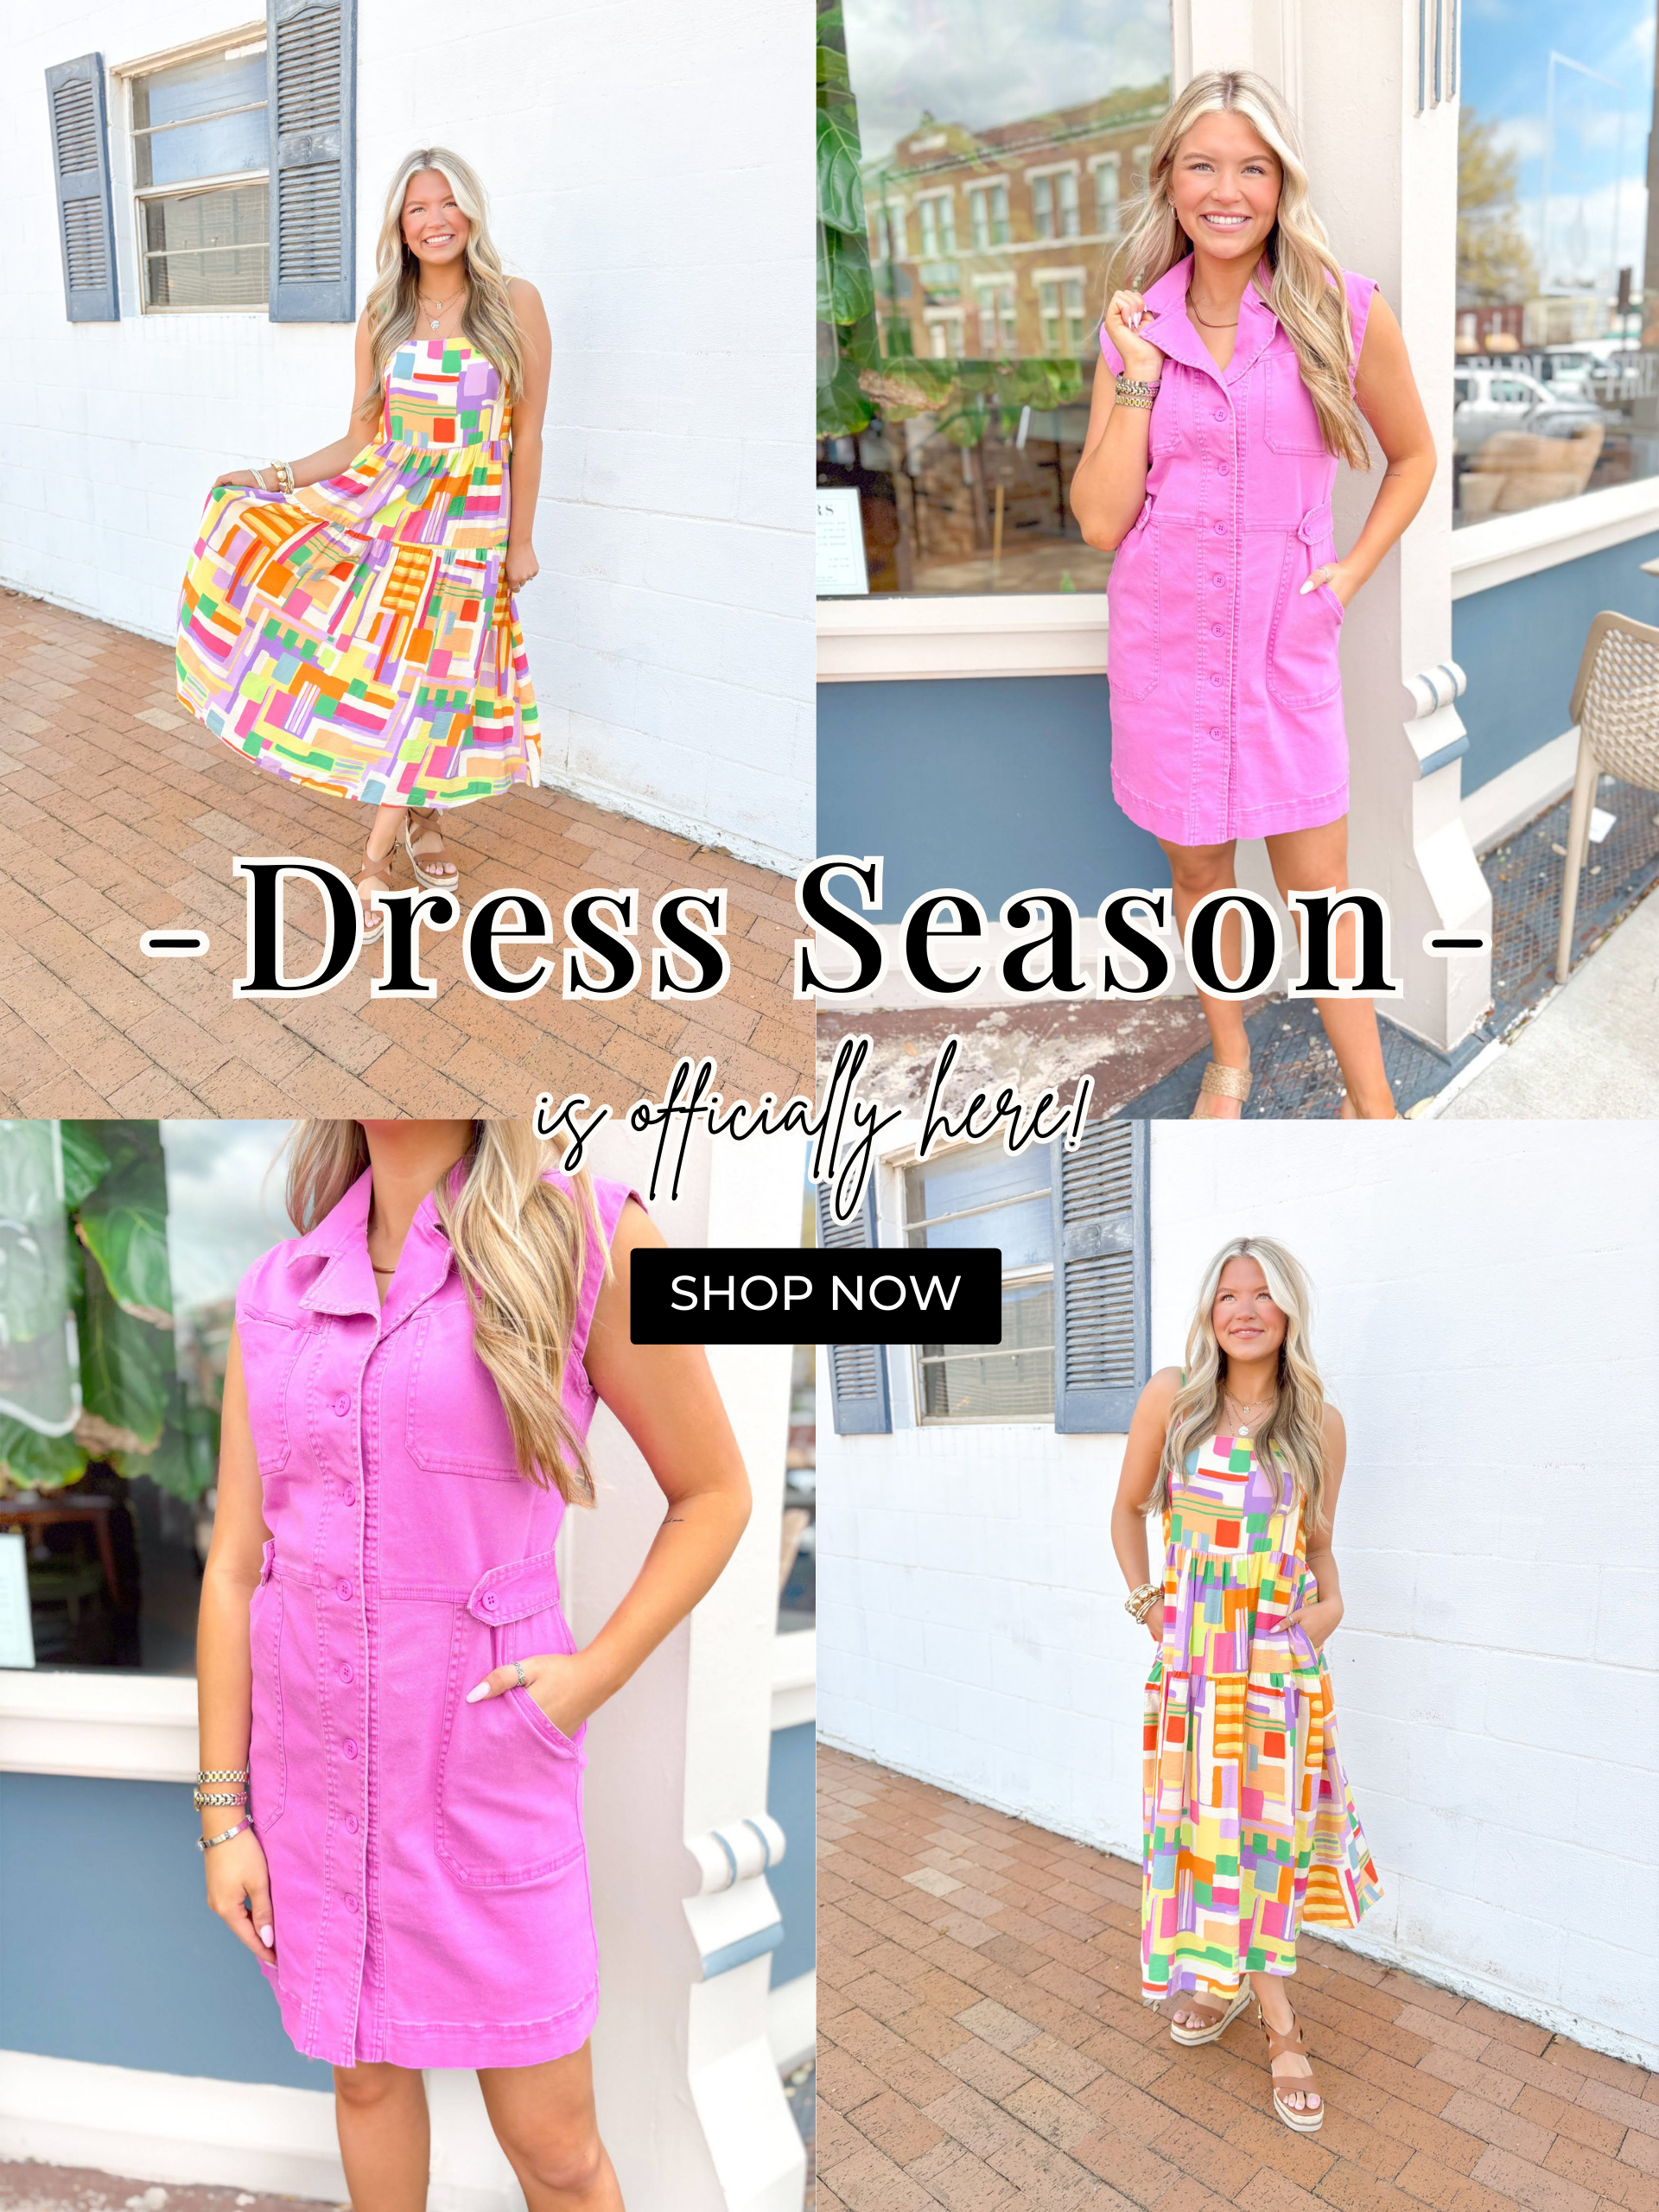 Dress Season is officially here! Model wearing midi print geometric colorful printed dress. Model wearing an orchid pink denim mini dress with no sleeves, button front and a collar neckline.